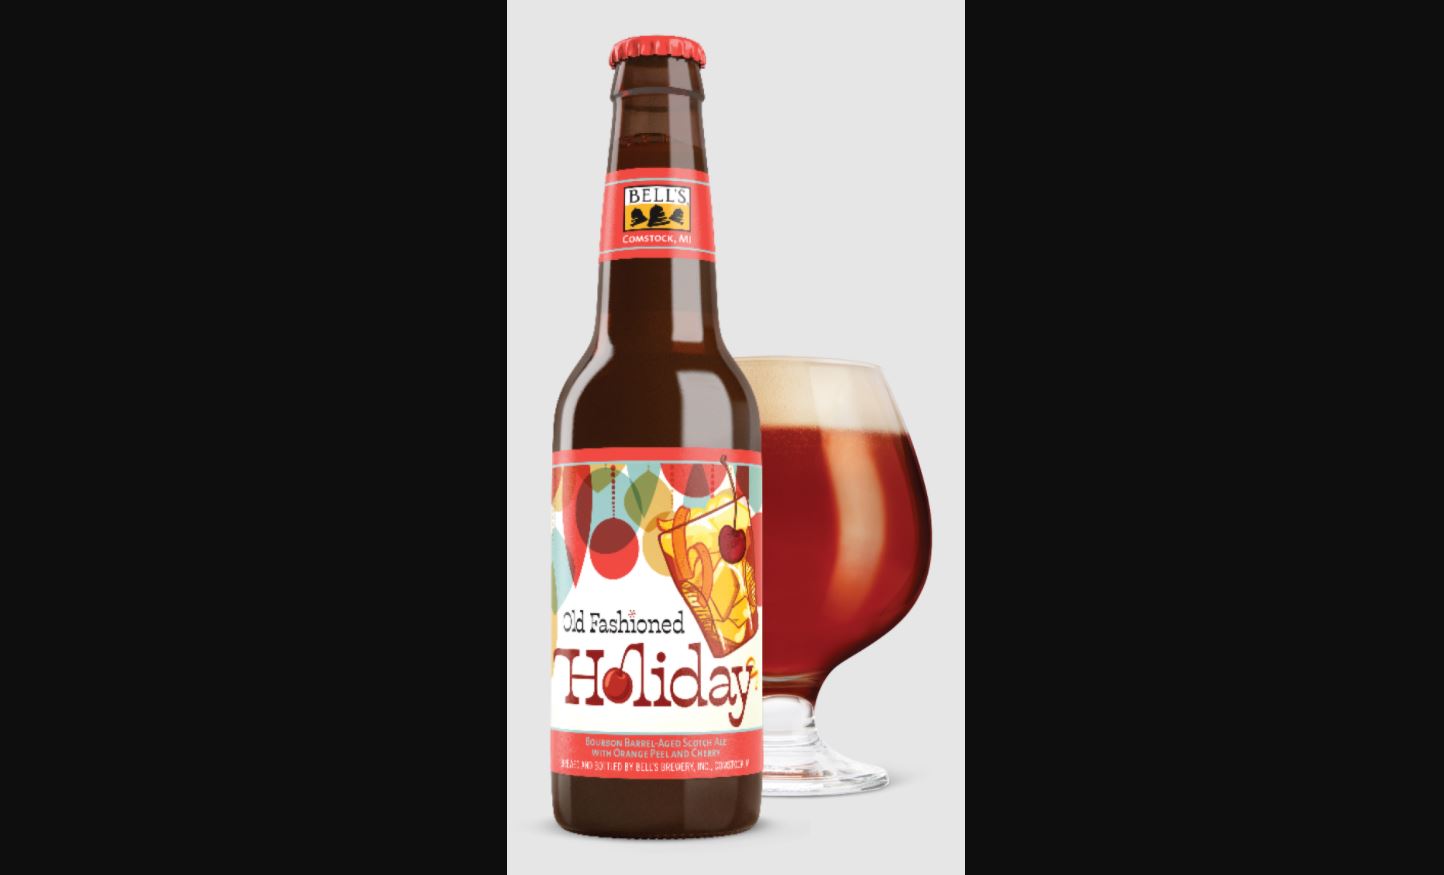 Bell’s Old Fashioned Holiday Ale